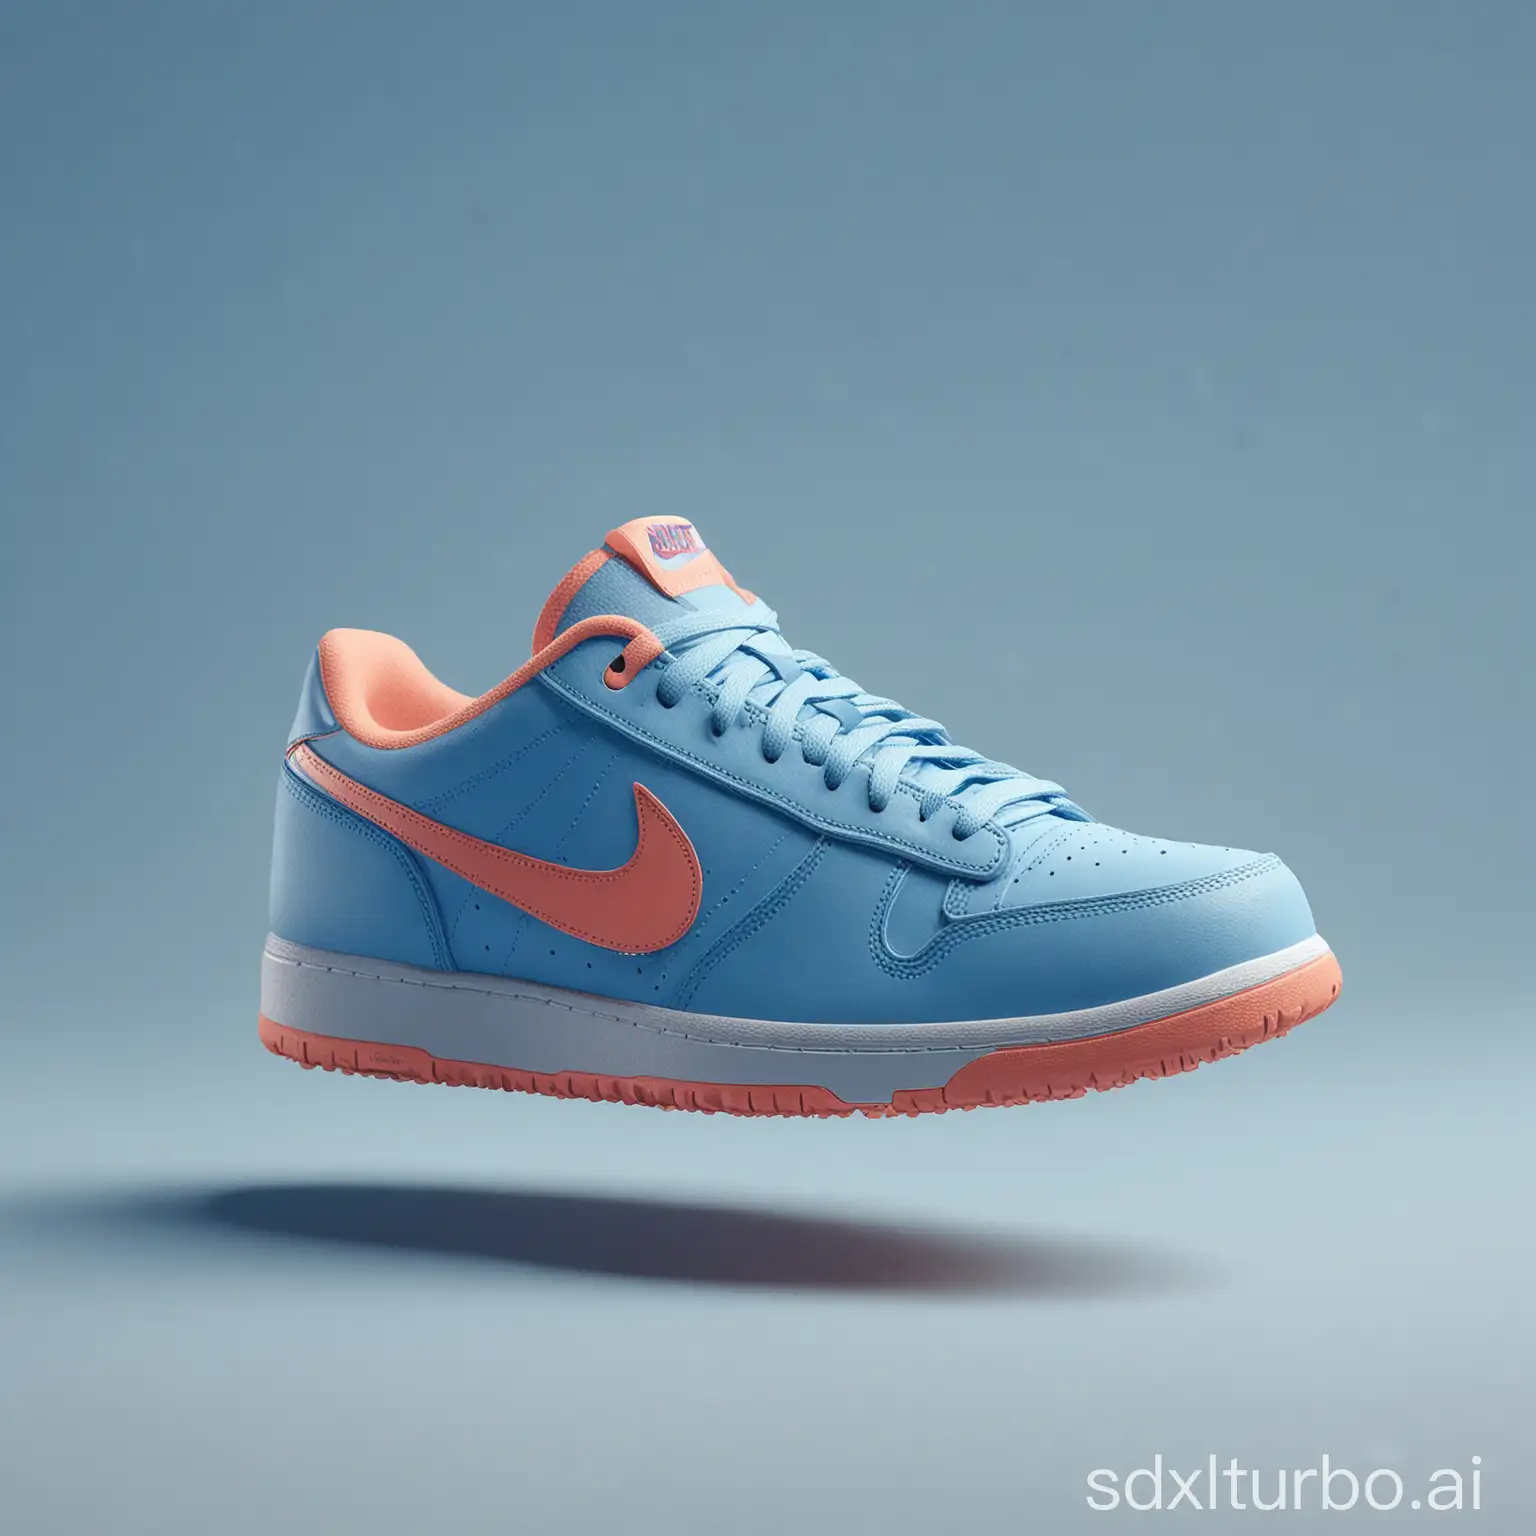 Product shot of nike shoes,with soft vibrant colors,3d blender render,modular constructivism,blue background, physically based rendering,centered